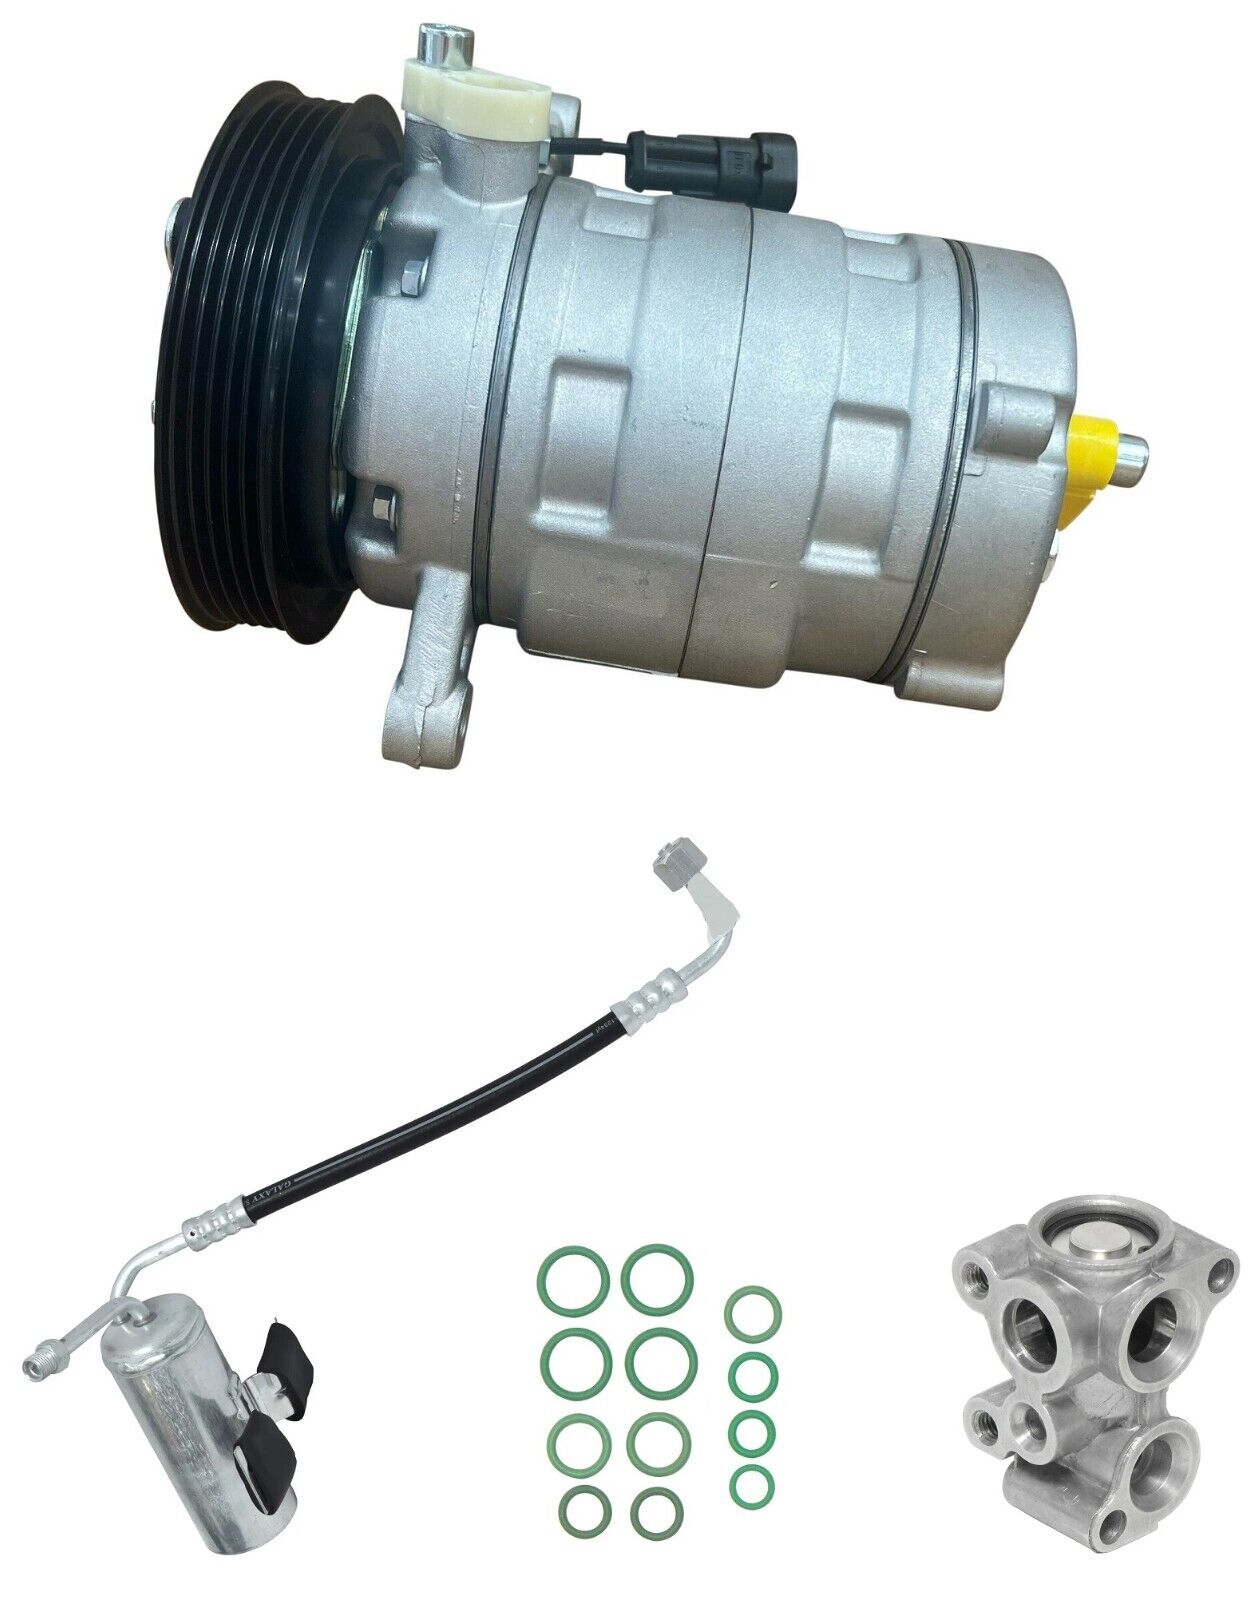 BRAND NEW RYC AC Compressor Kit EH63N Fits Saturn SC2 Coupe 1.9L 2001, 2002